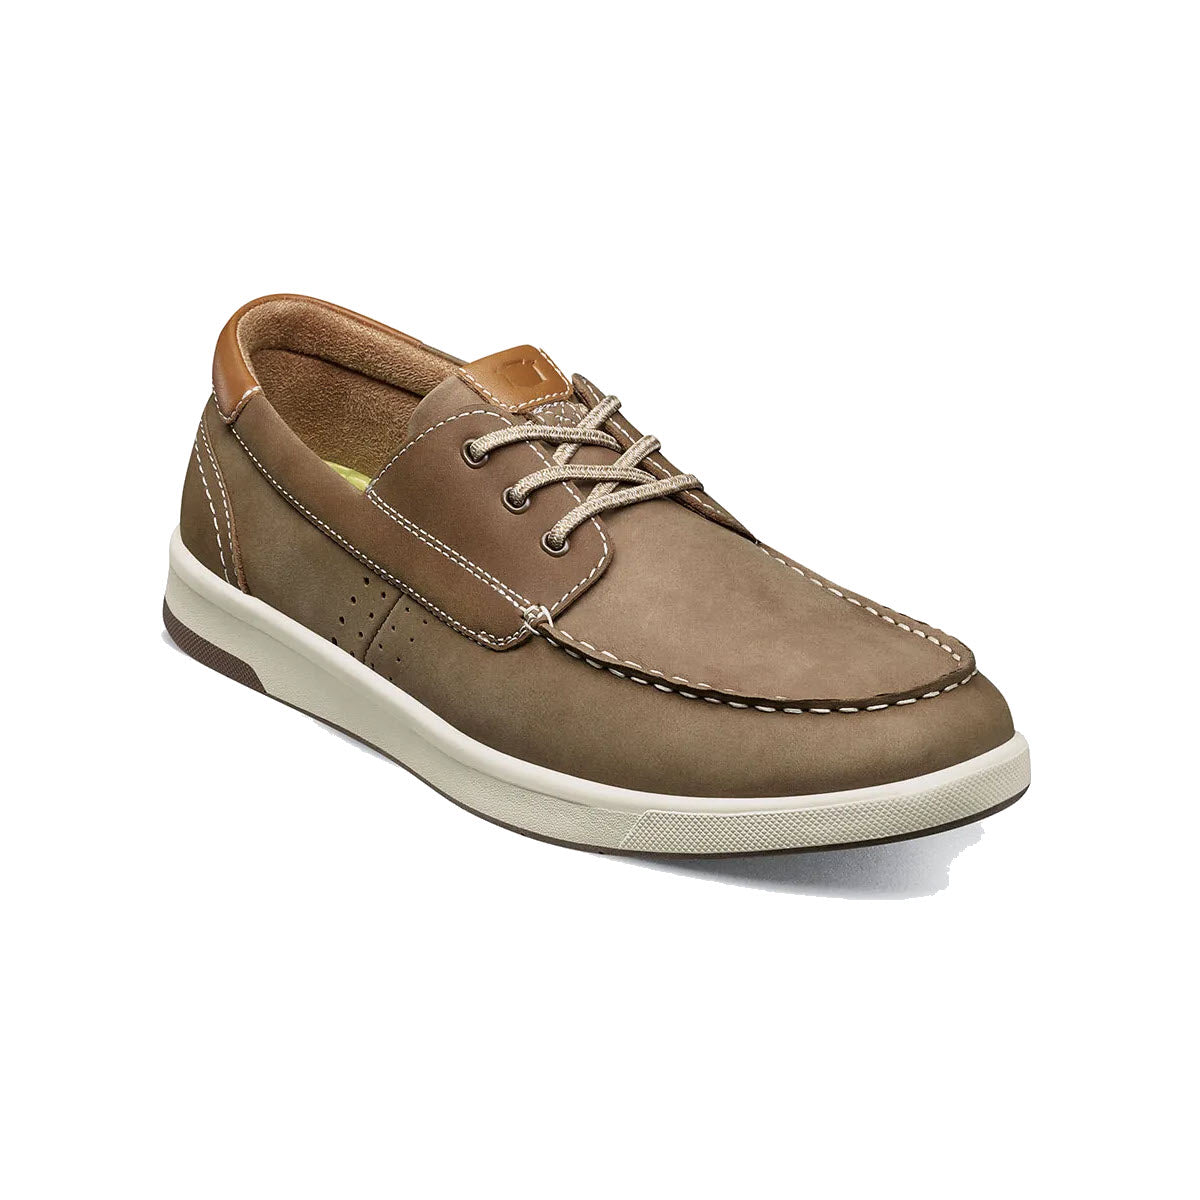 A single Florsheim Crossover Moc Toe Boat Shoe Mushroom Nubuck with white laces and a white sole against a plain white background.